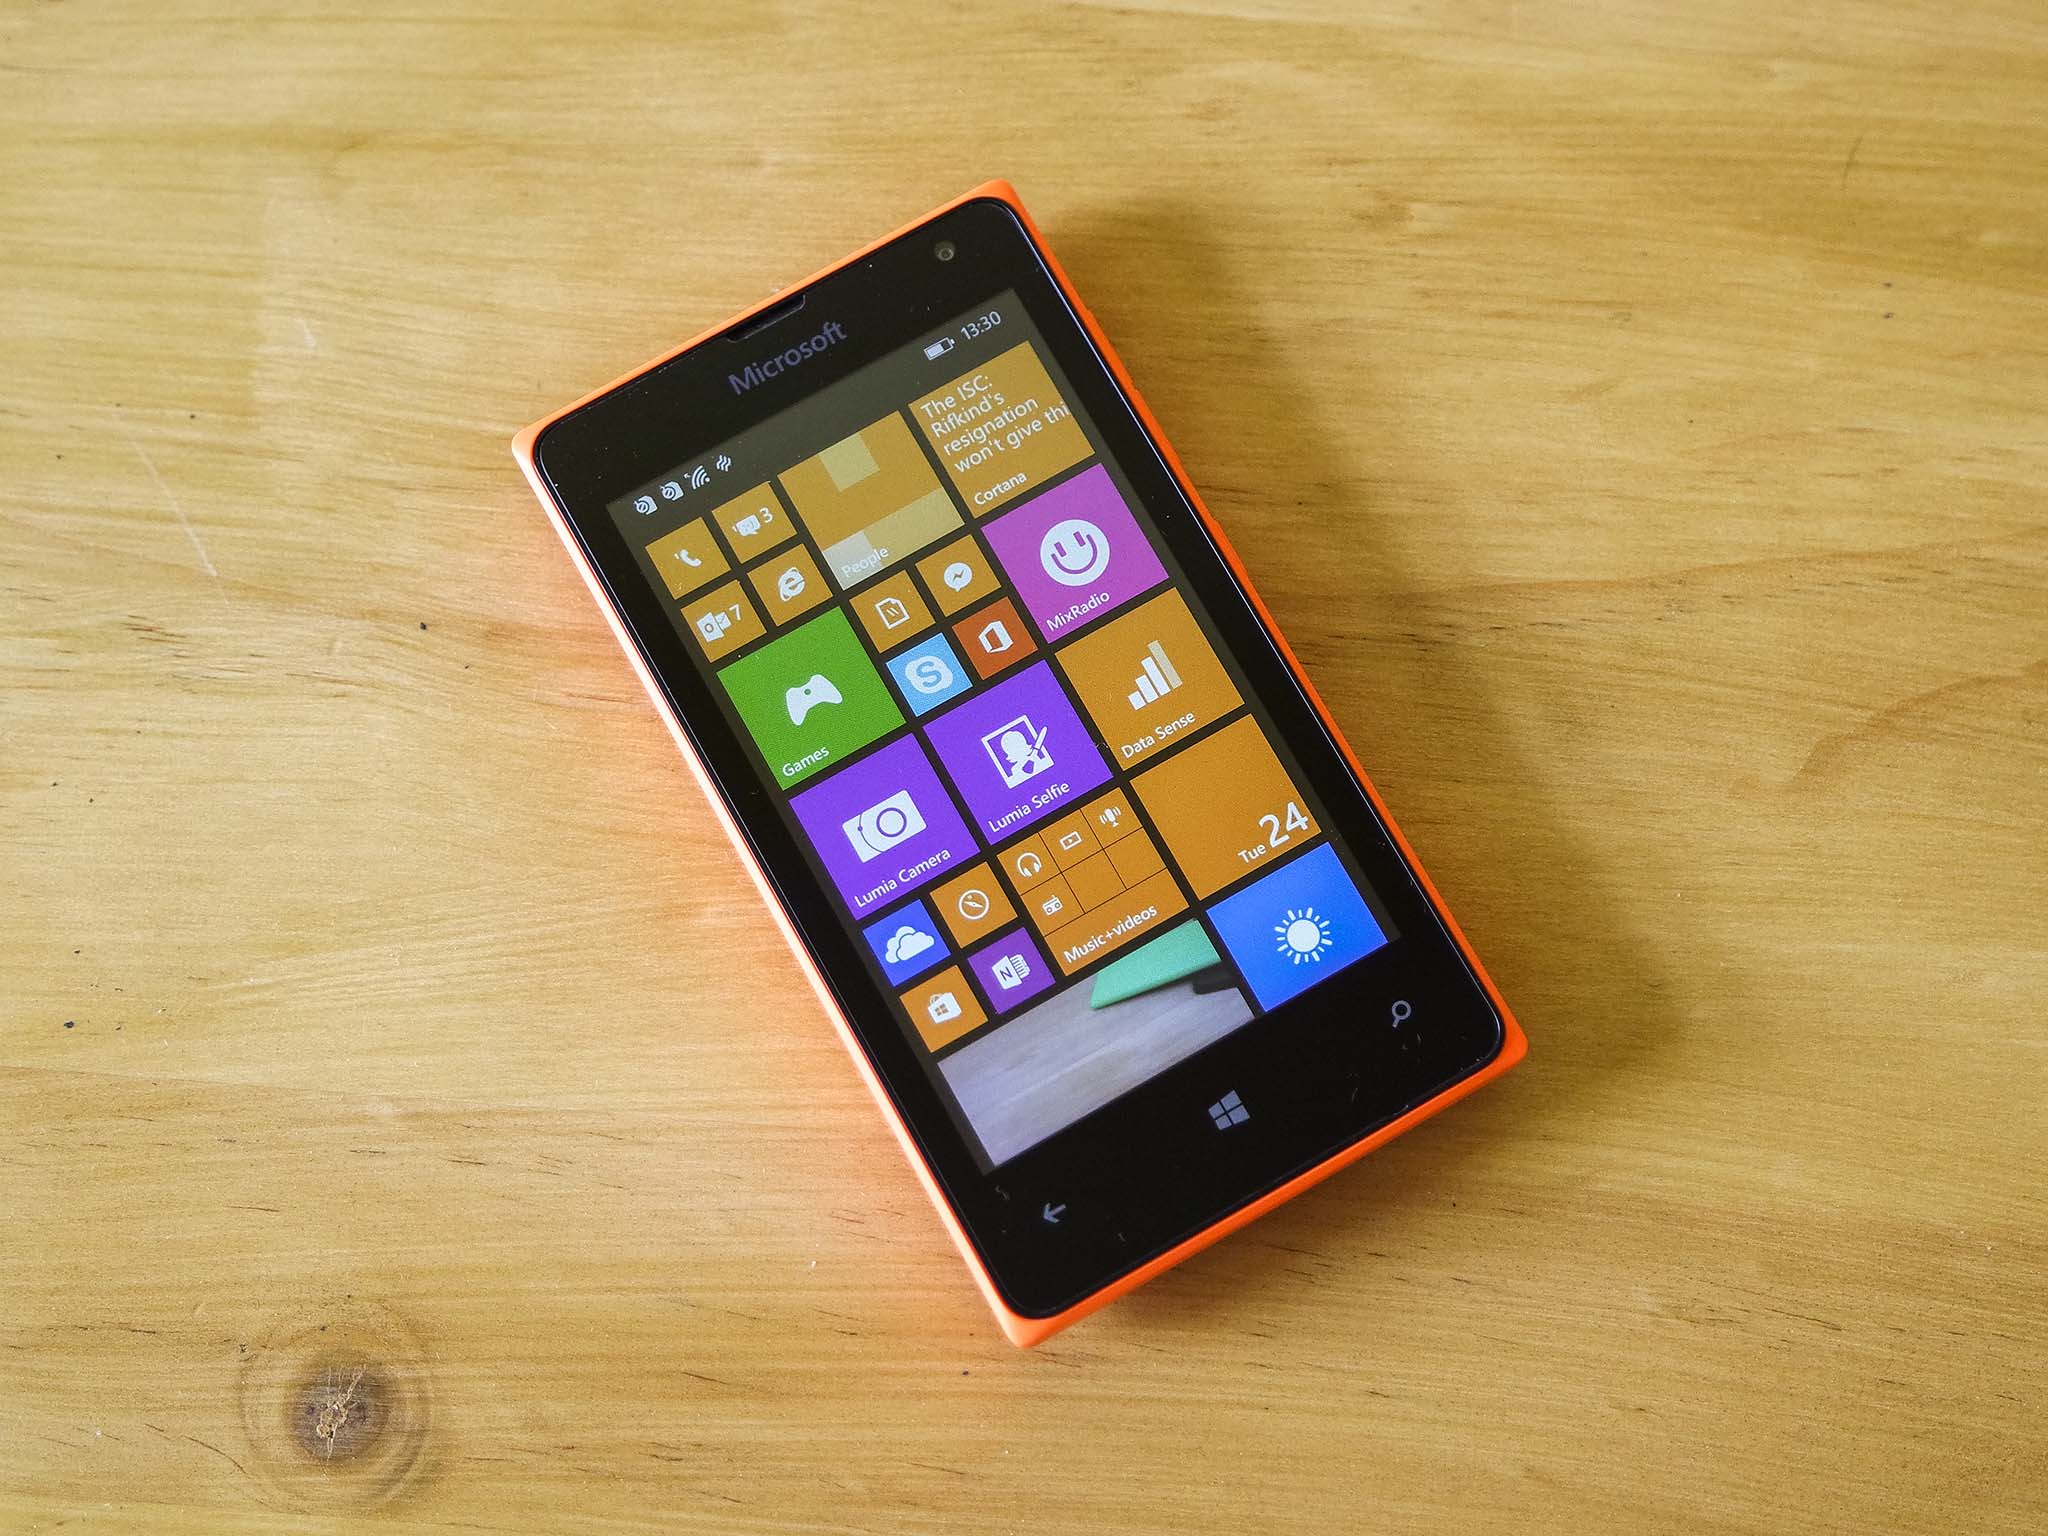 http://www.windowscentral.com/sites/wpcentral.com/files/styles/large_wm_brw/public/postimages/2015/02/lumia-435-review-hero.jpg?itok=TWM5tBKm